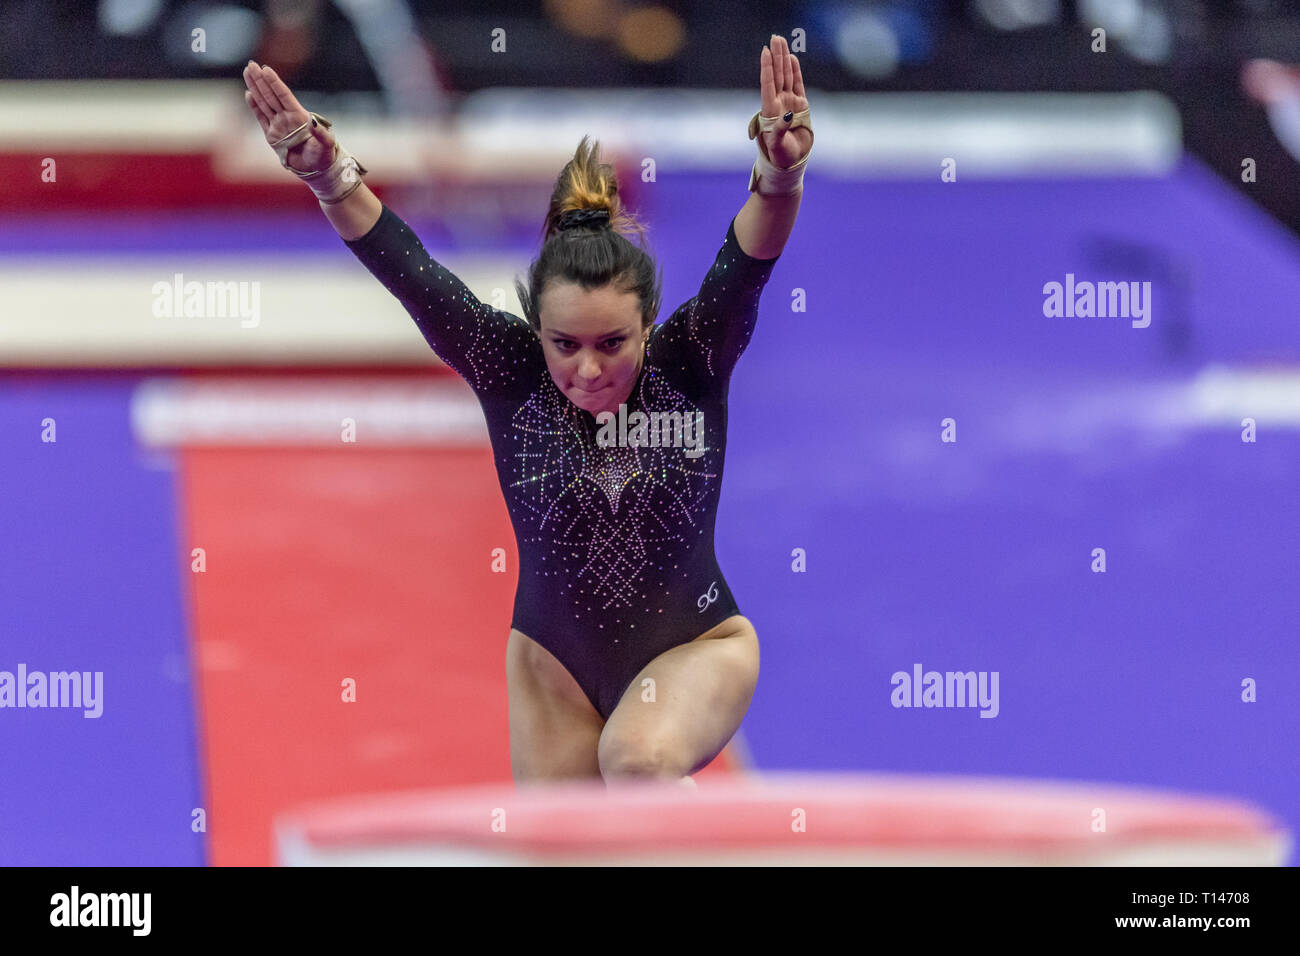 London, UK. 23rd March, 2019. Ana Lago of Mexico performs on the Vault during the Matchroom Multisport presents the 2019 Superstars of Gymnastics at The O2 Arena on Saturday, 23 March 2019. LONDON ENGLAND. Credit: Taka G Wu/Alamy News Stock Photo